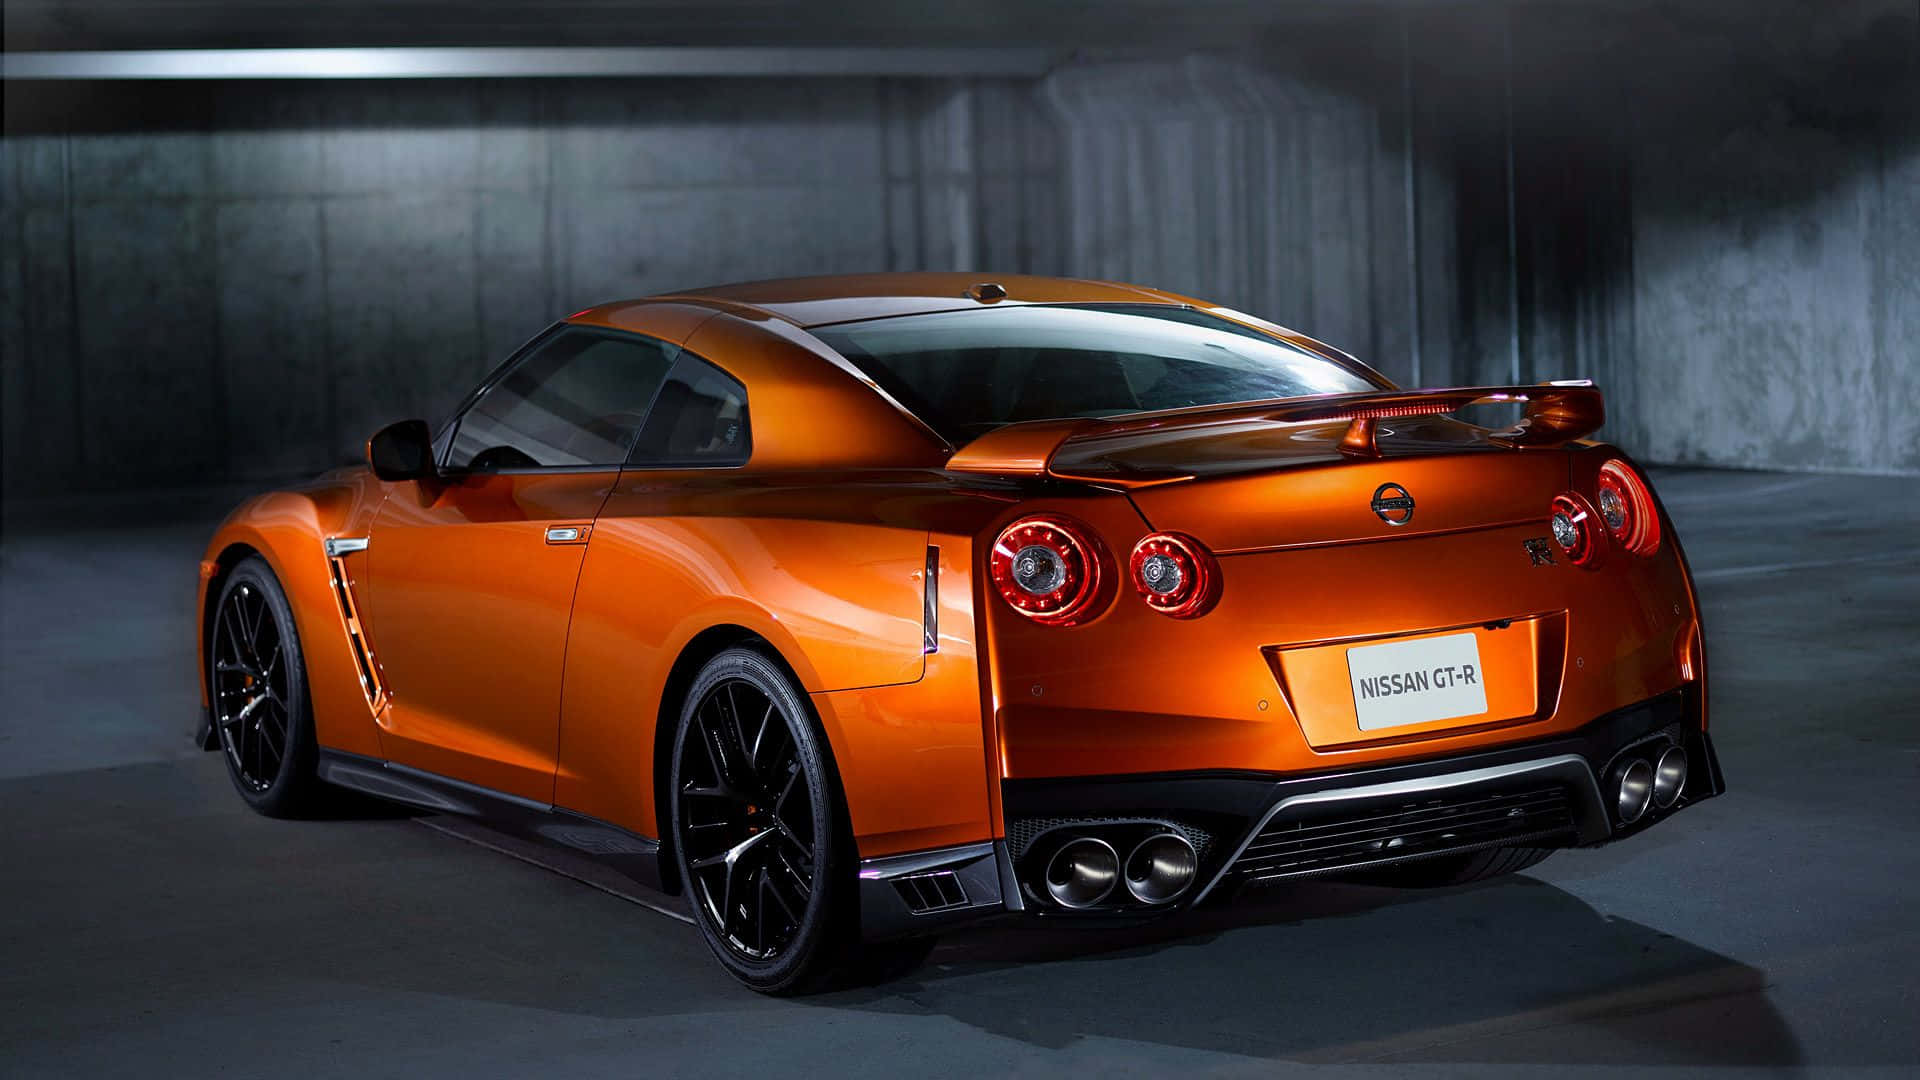 Feel the Adrenaline Rush of Driving a Nissan GTR